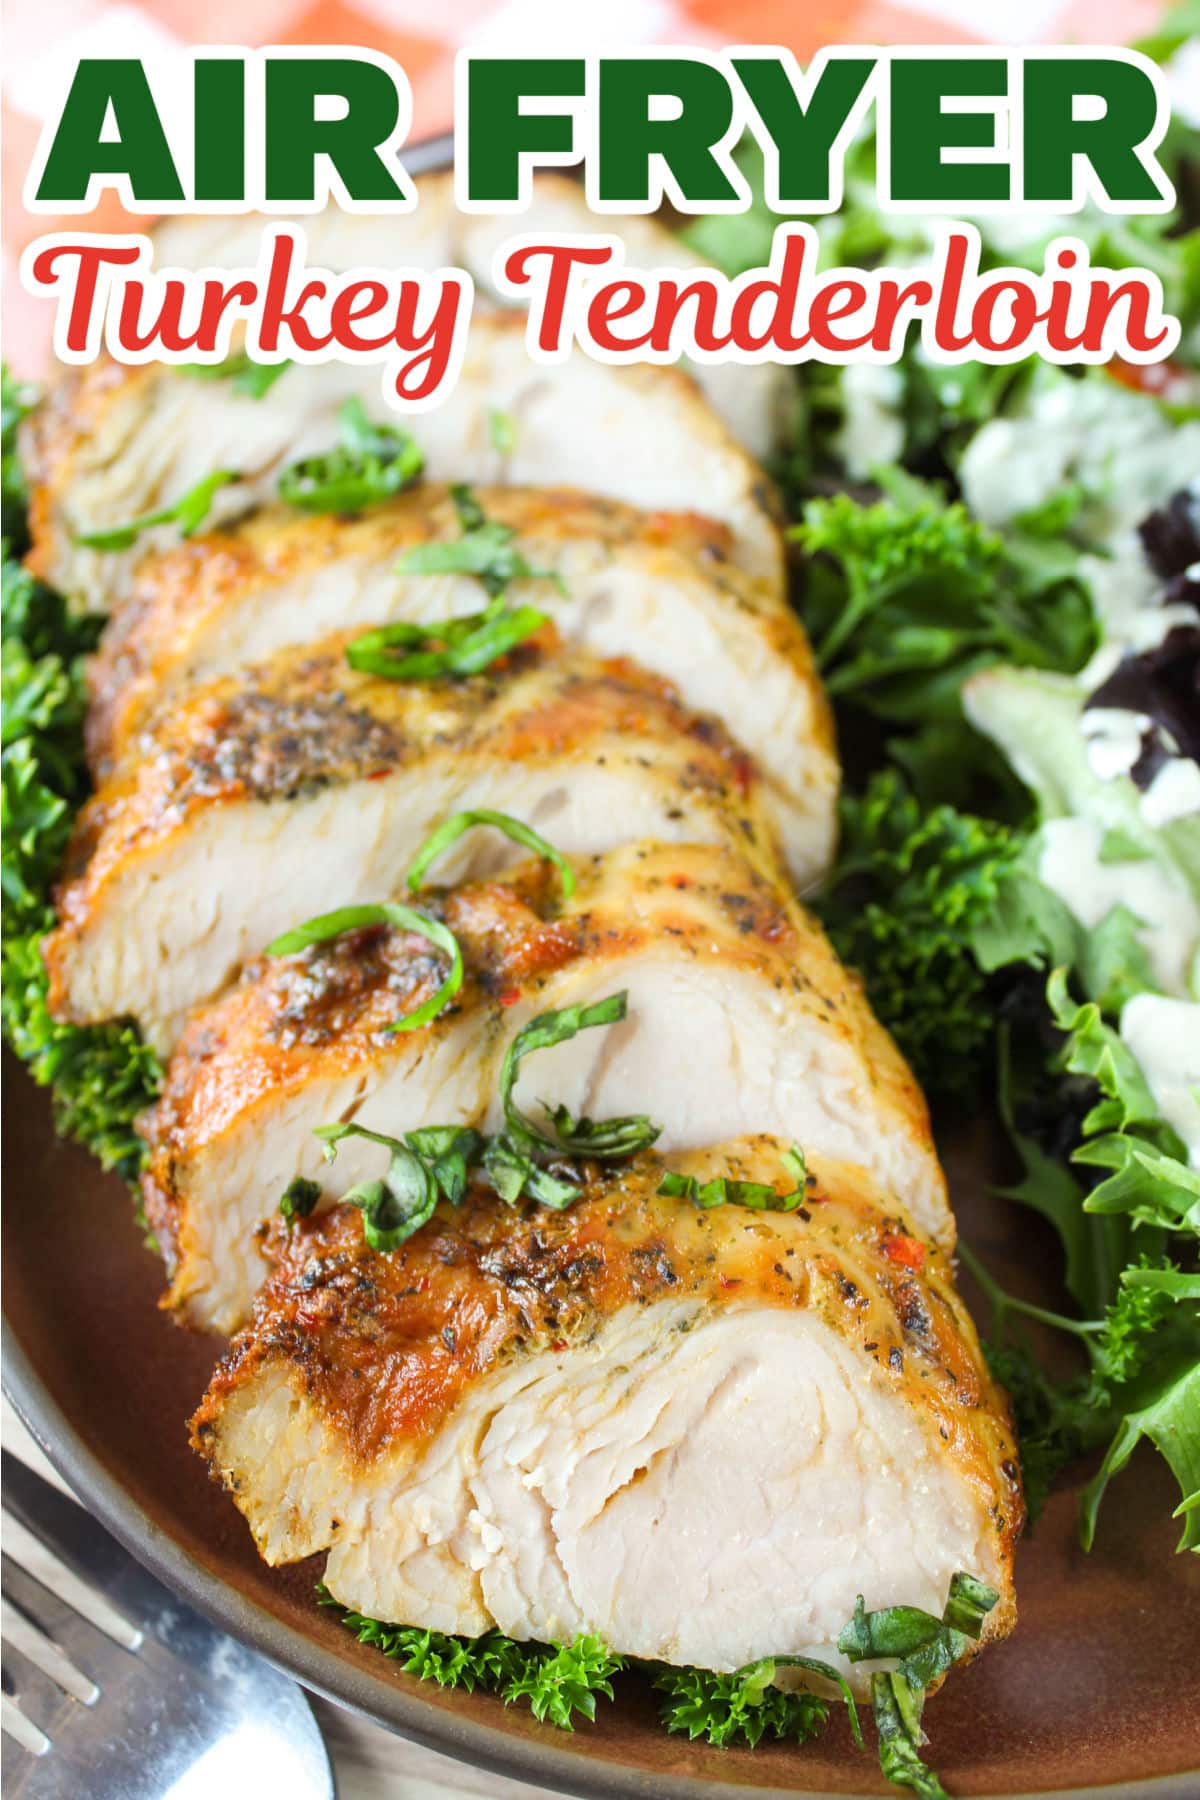 The turkey breast tenderloin is just a boneless and skinless portion of the turkey breast. They often package them in the grocery store in packs of two to look like a pork tenderloin.  via @foodhussy